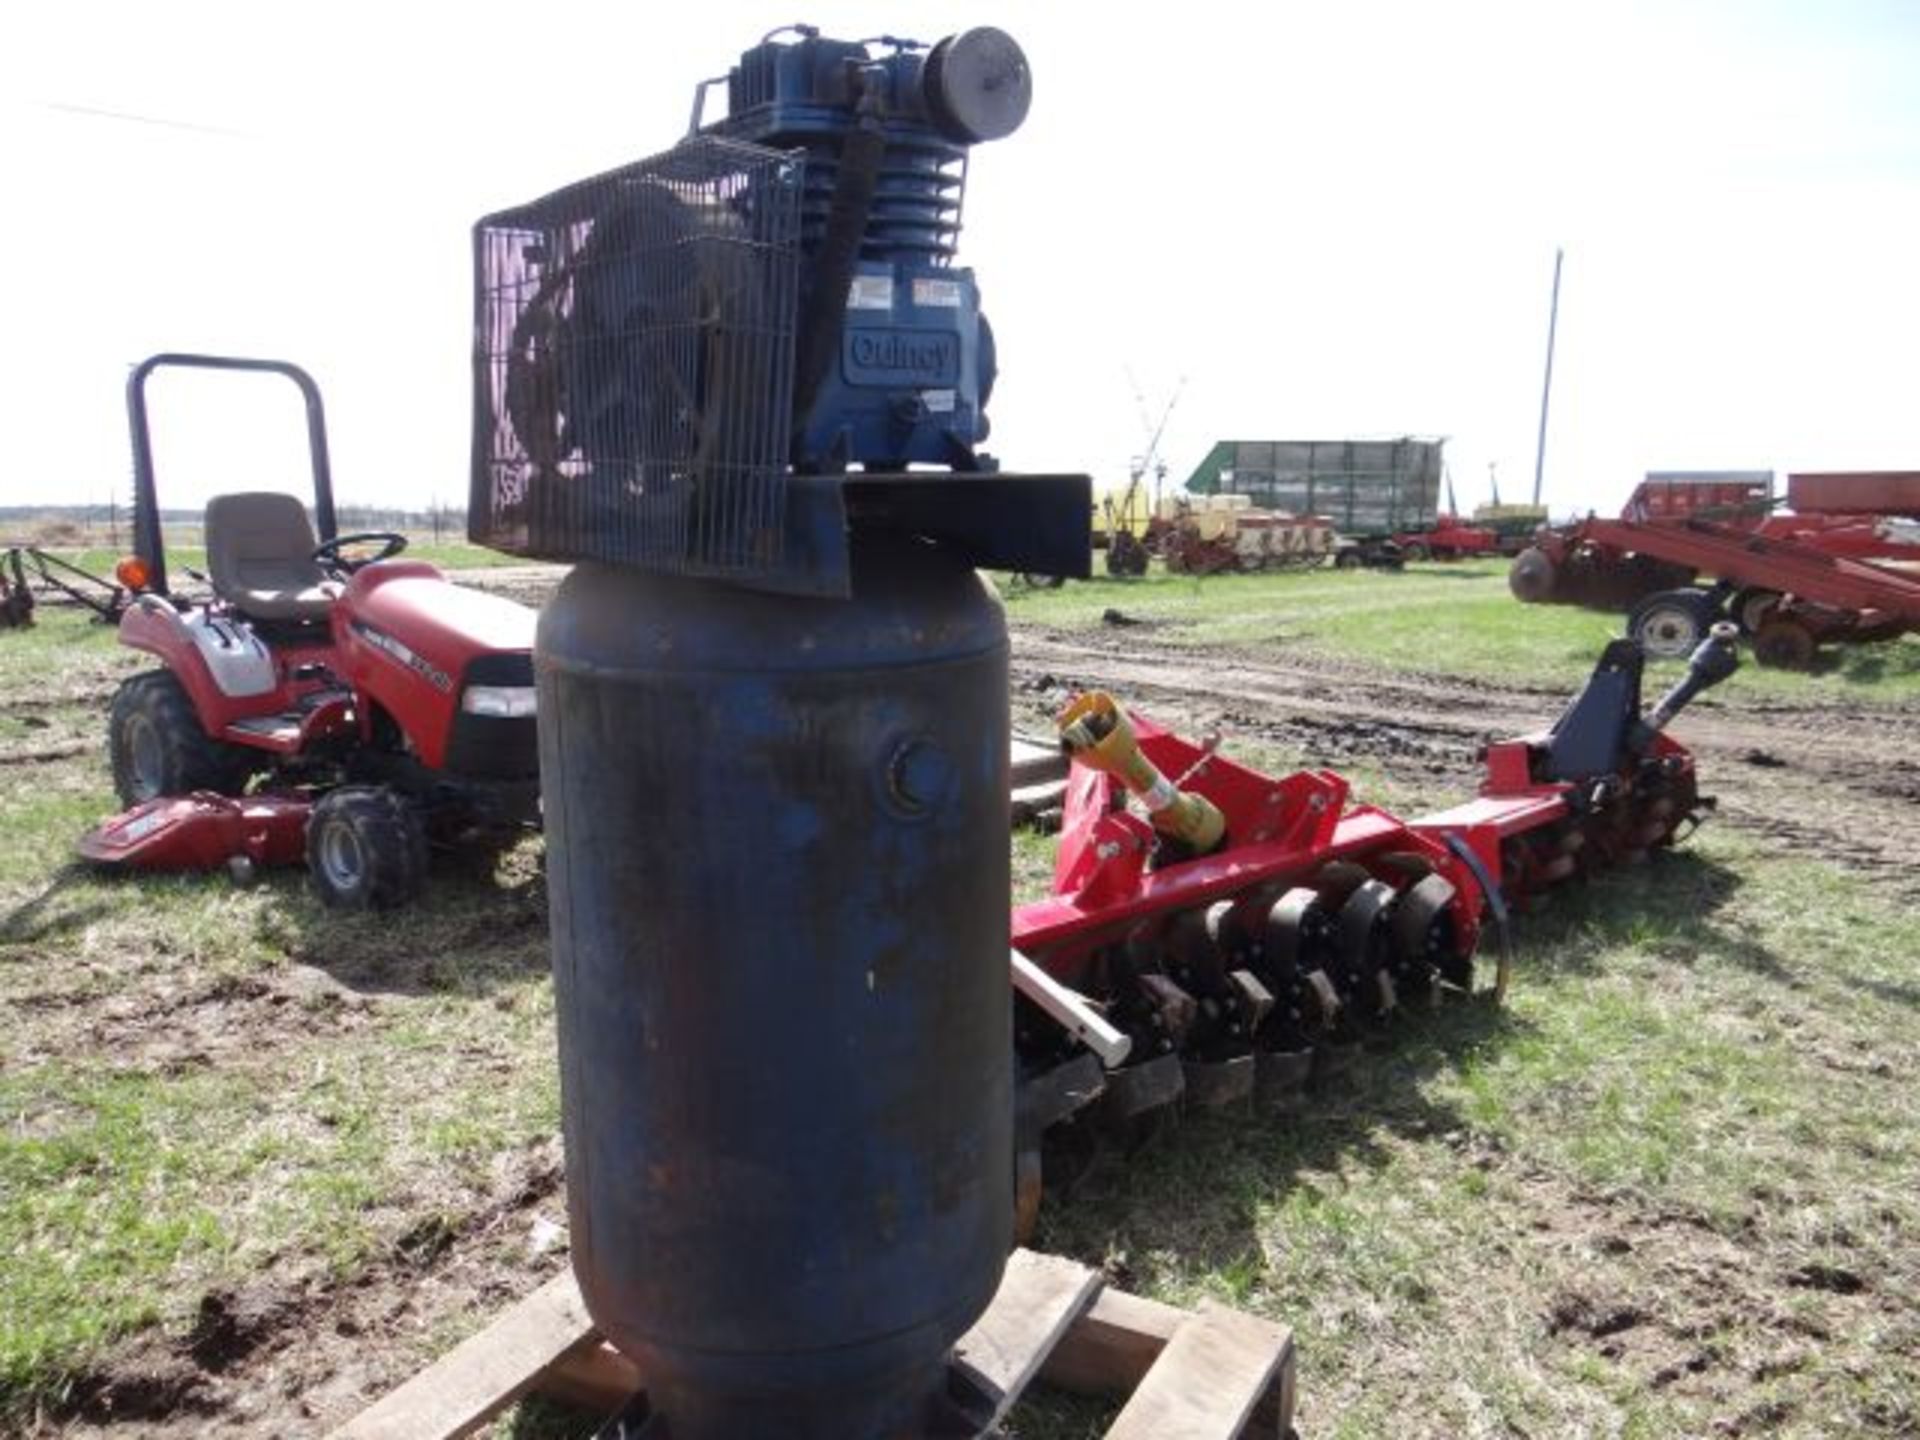 Lot 3272 Quincy 80 Gallon Air Compressor 3 Phase - Image 2 of 2